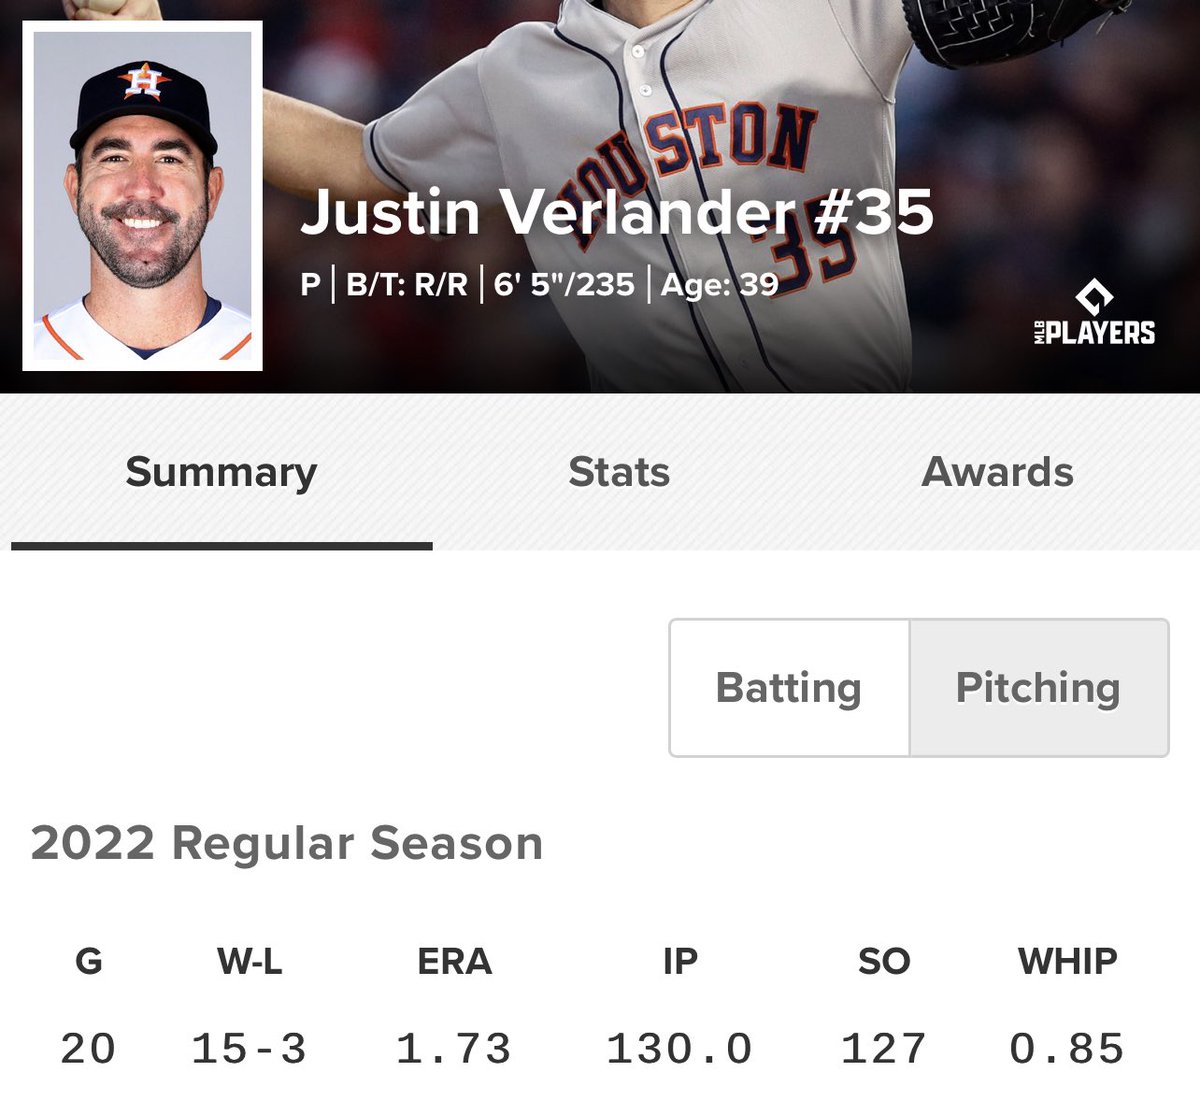 RT @JLasagna43: Gerrit Cole not being close to Verlander in the Cy Young race is an embarrassment https://t.co/icBWjVByTo